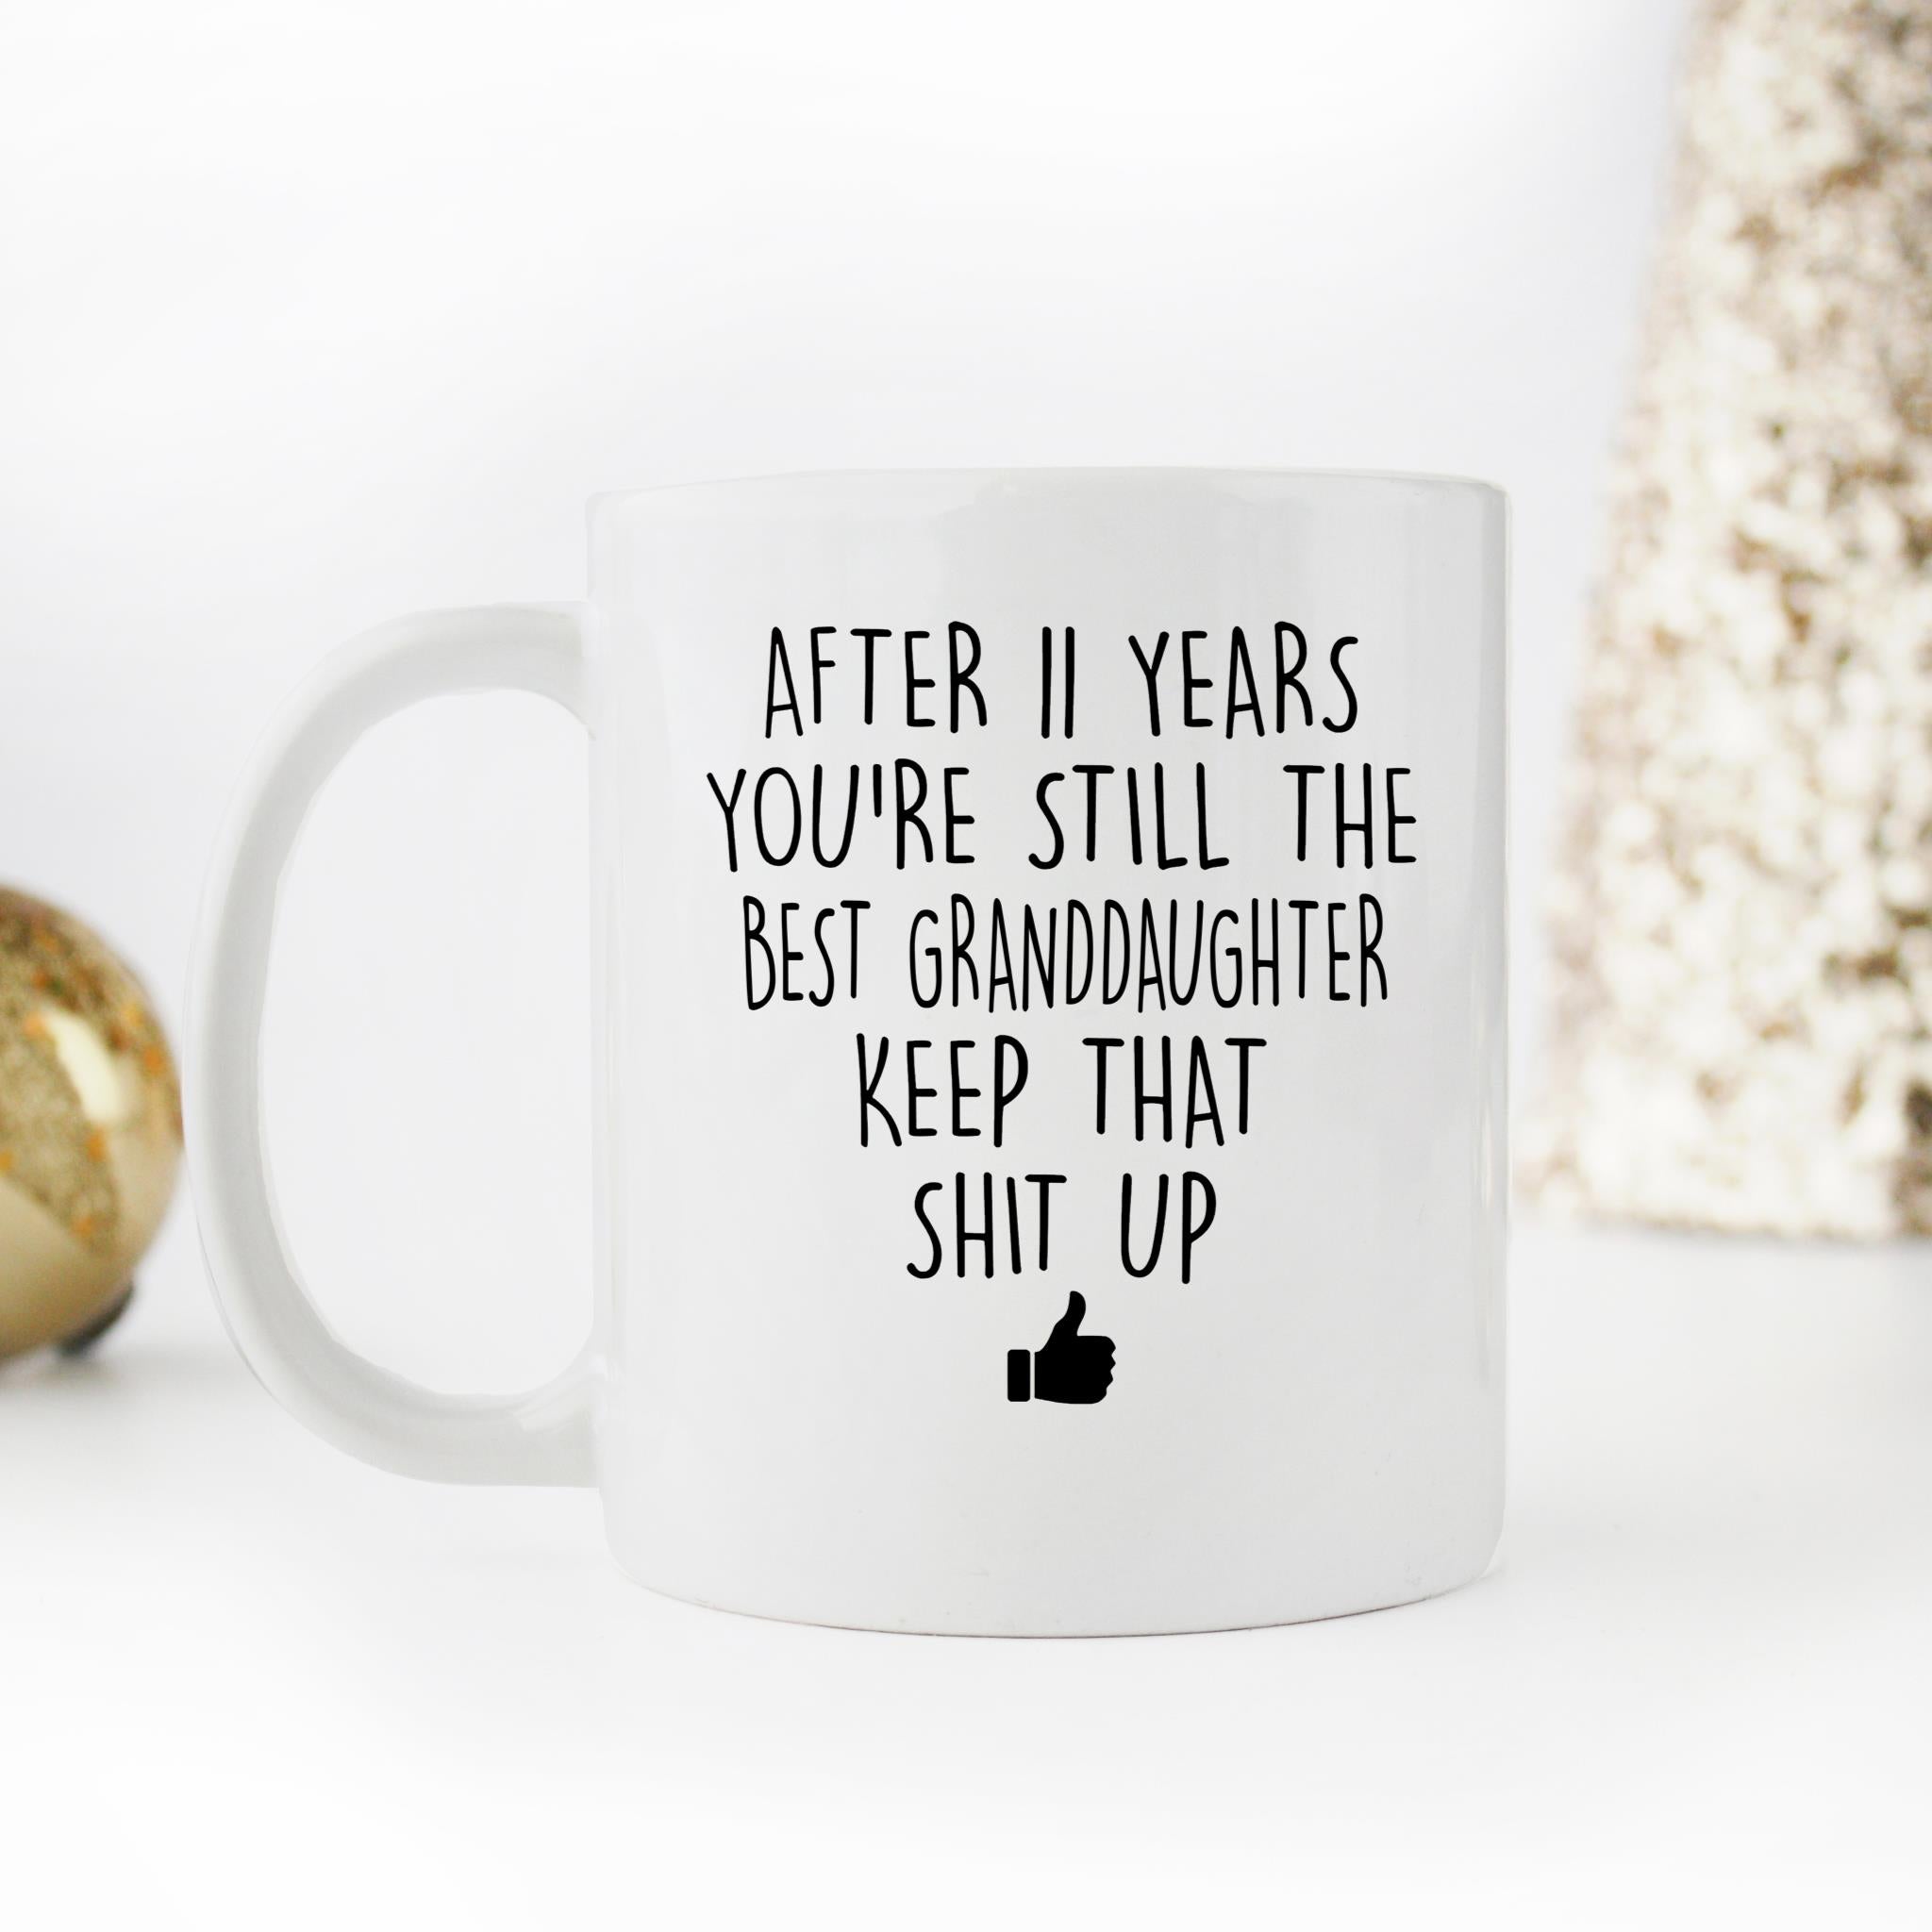 Skitongifts Funny Ceramic Novelty Coffee Mug After Custom Years You're Still The Best Granddaughter Keep That Shit Up 4Jd4RPI